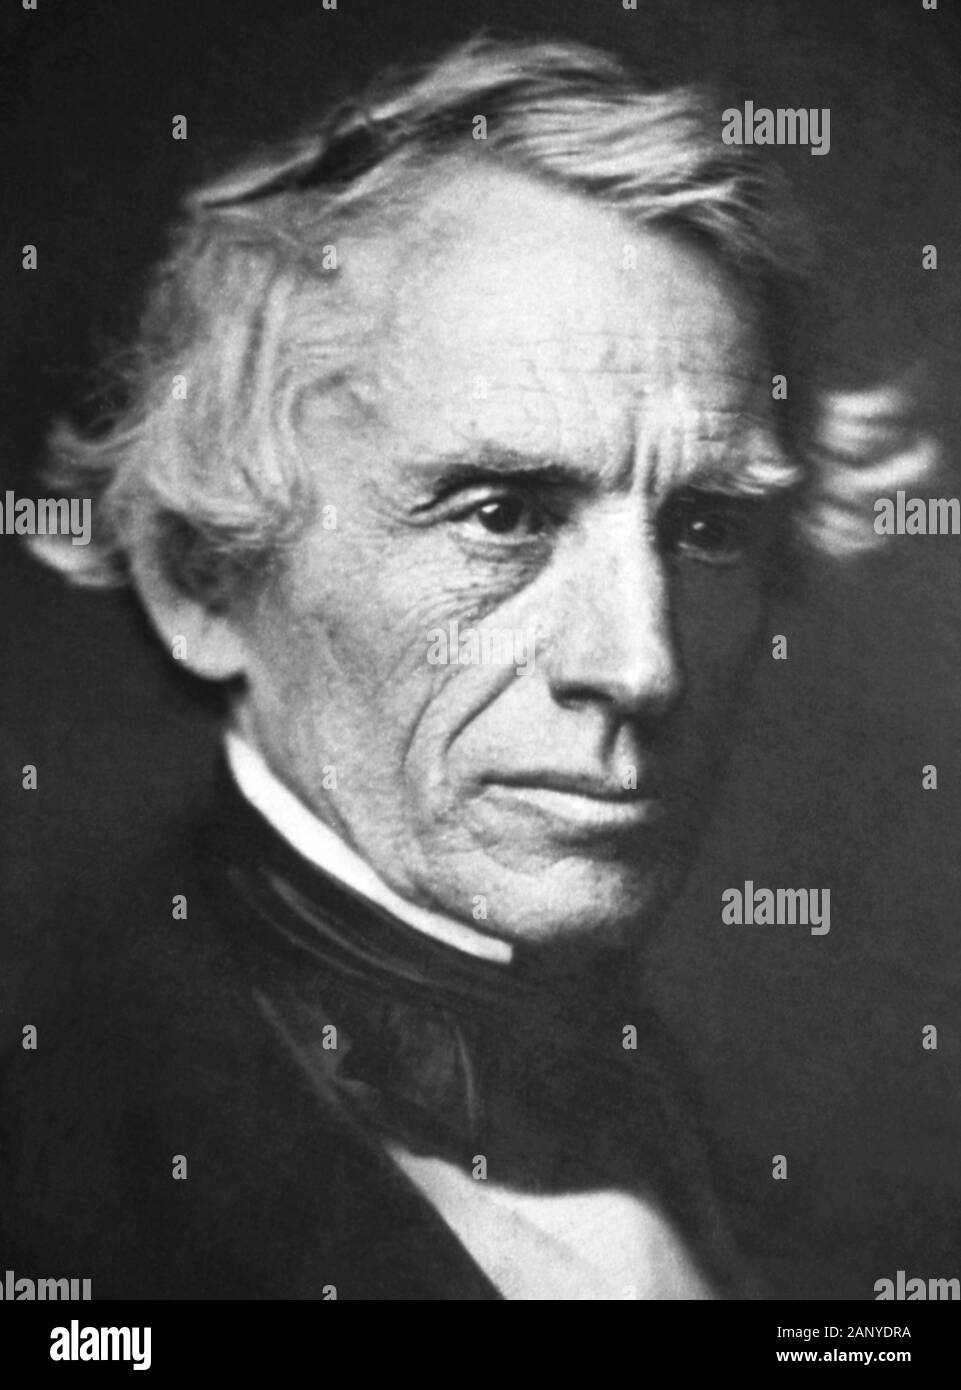 Vintage portrait photo of American painter and inventor Samuel F B Morse (1791 – 1872) – a pioneer in the development of the electric telegraph and co-creator of Morse Code. Daguerreotype photo circa 1845. Stock Photo